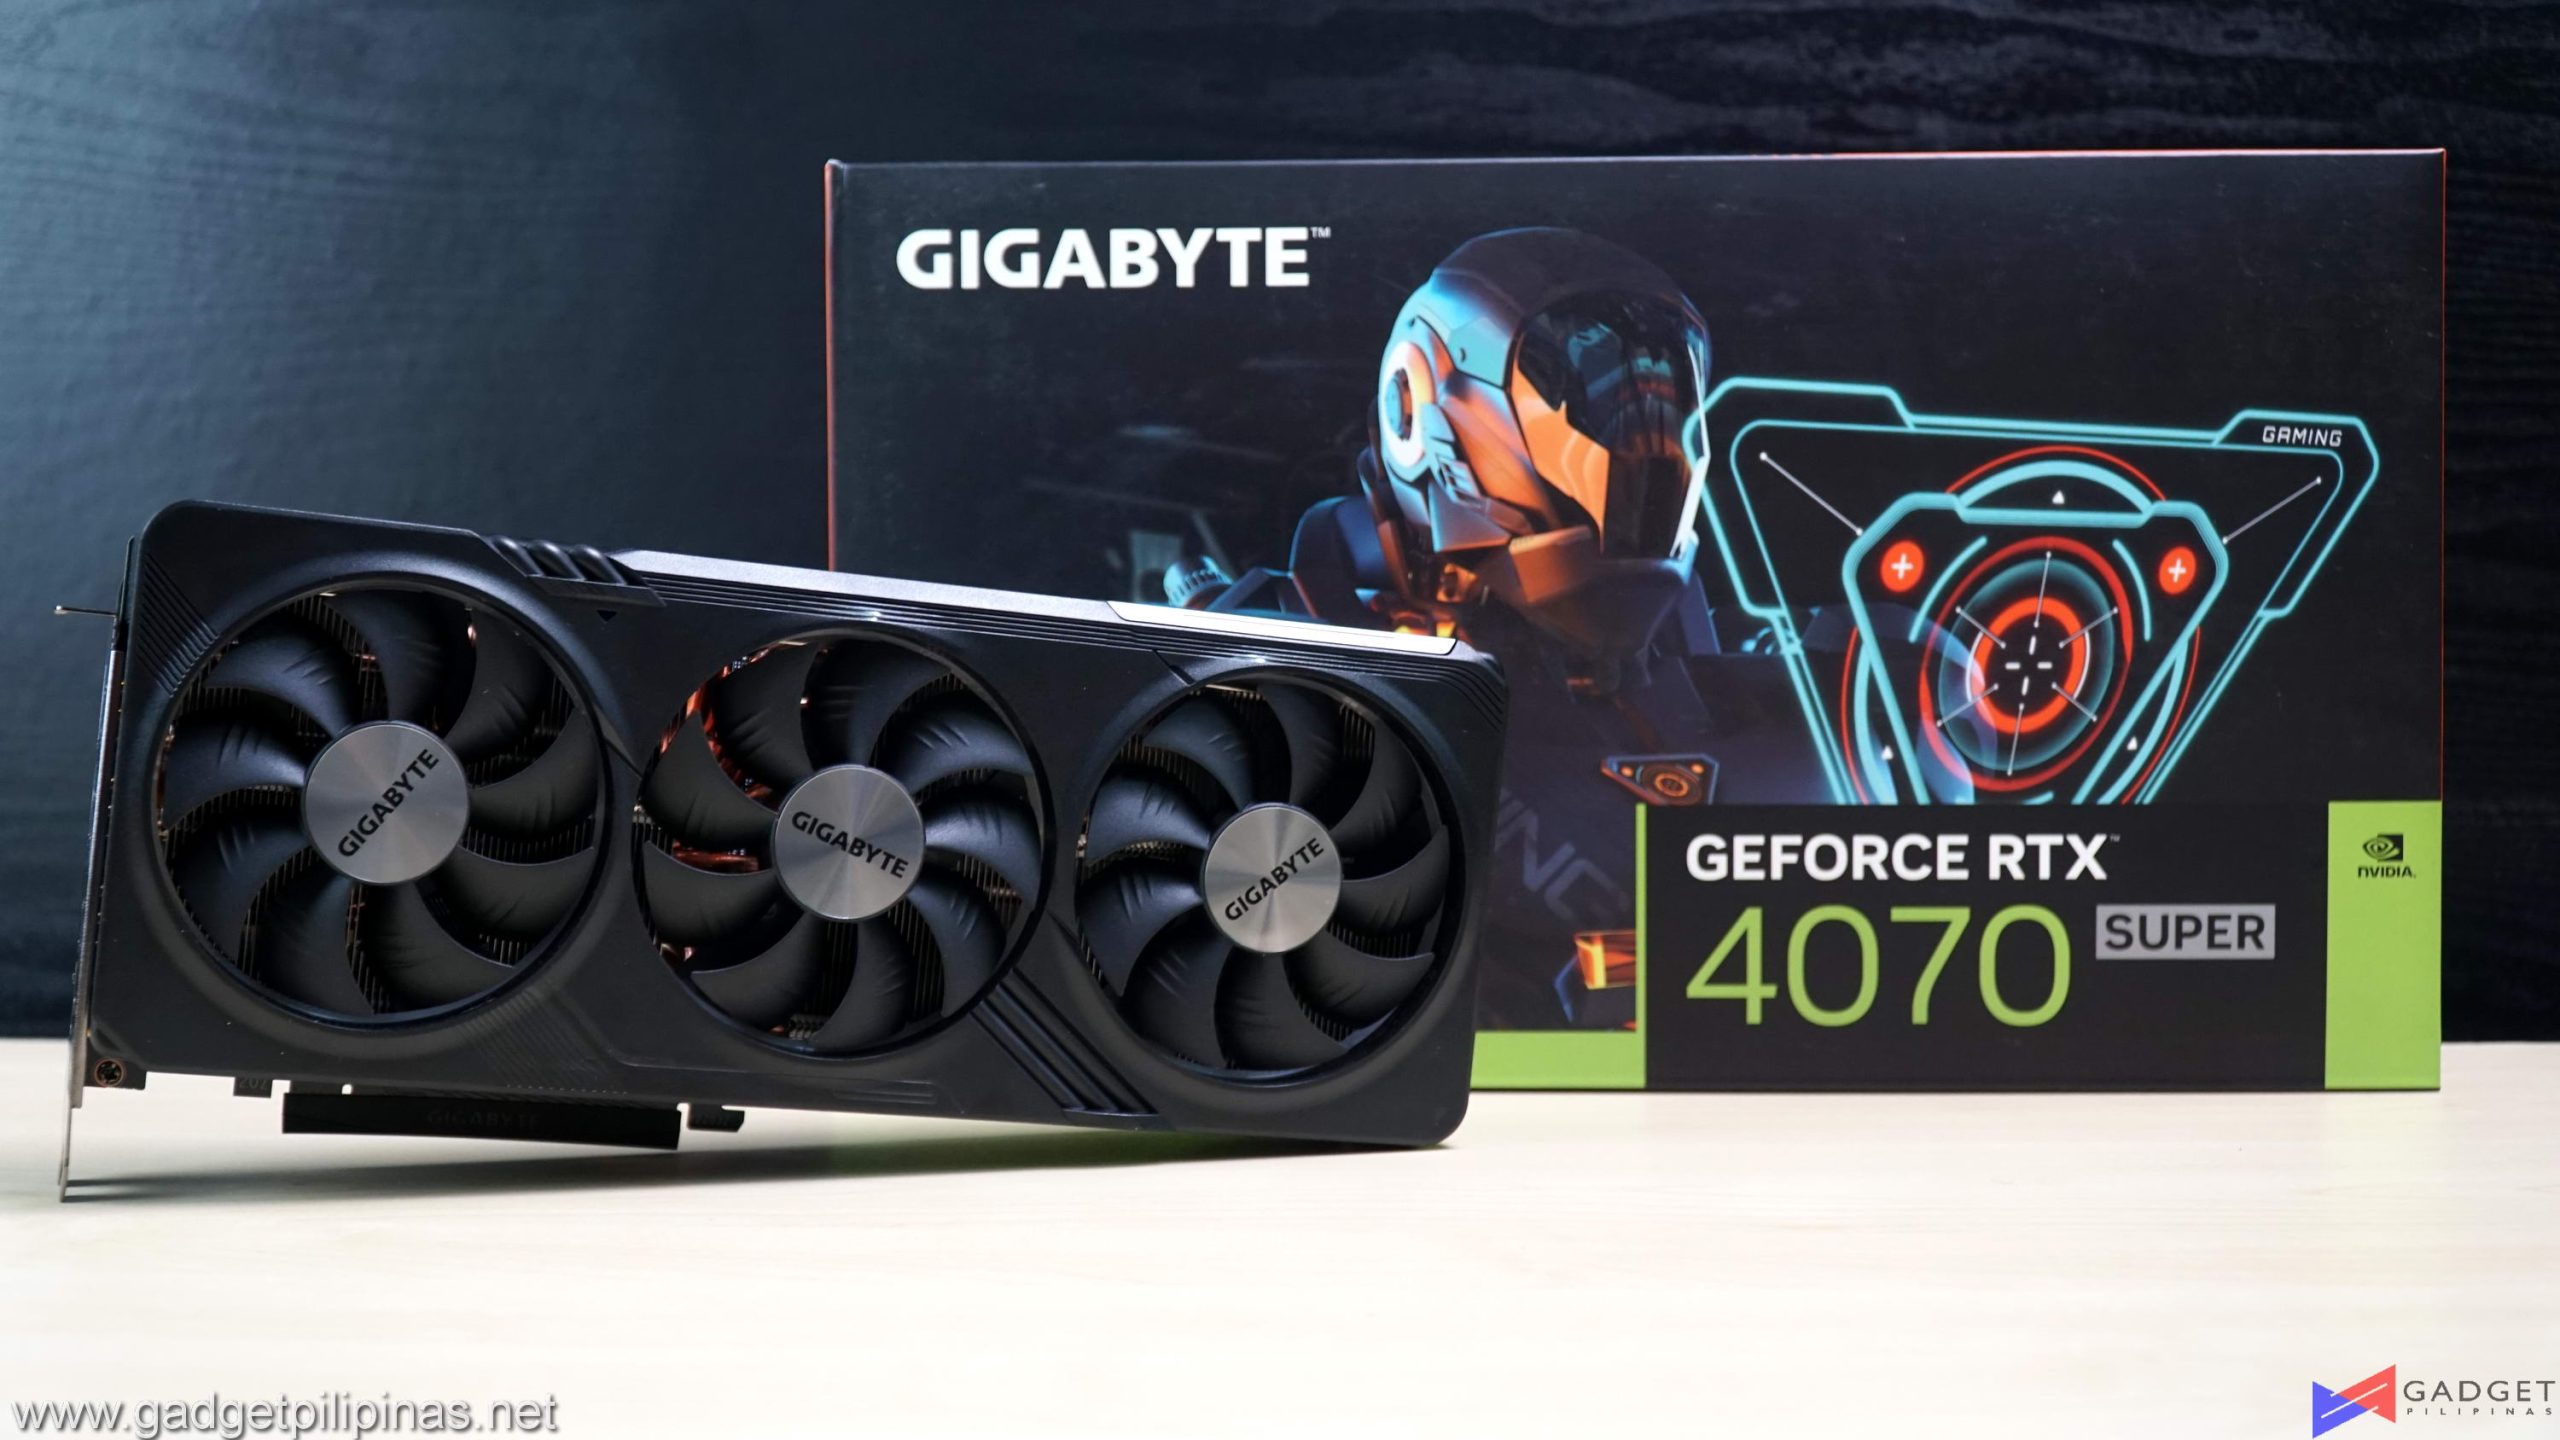 Gigabyte RTX 4070 SUPER Gaming OC Graphics Card Review – Justified Premium